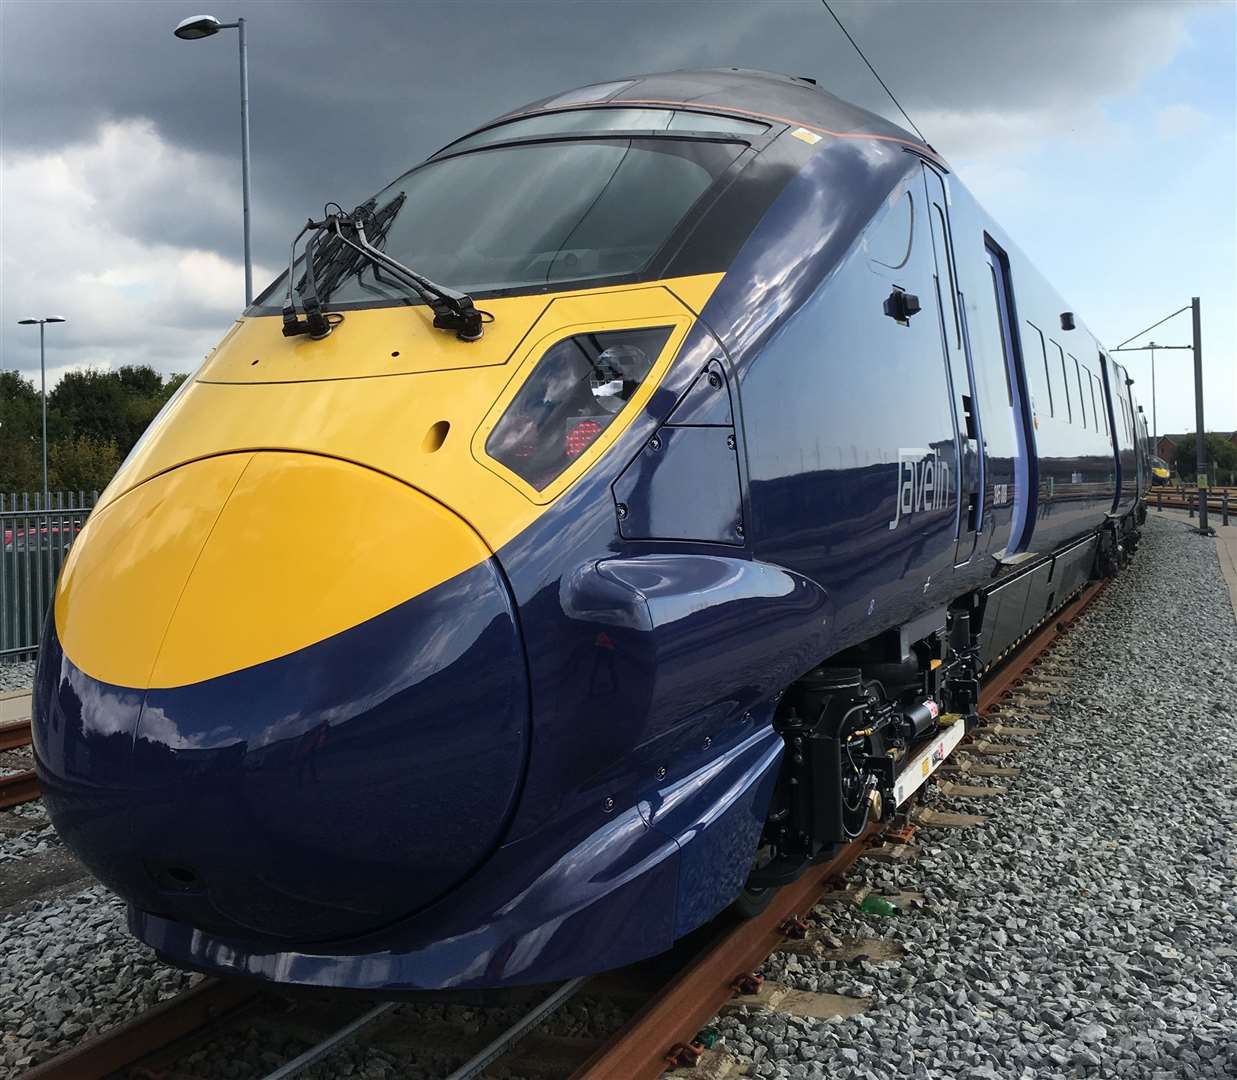 High speed train services through Ashford have been replaced by buses